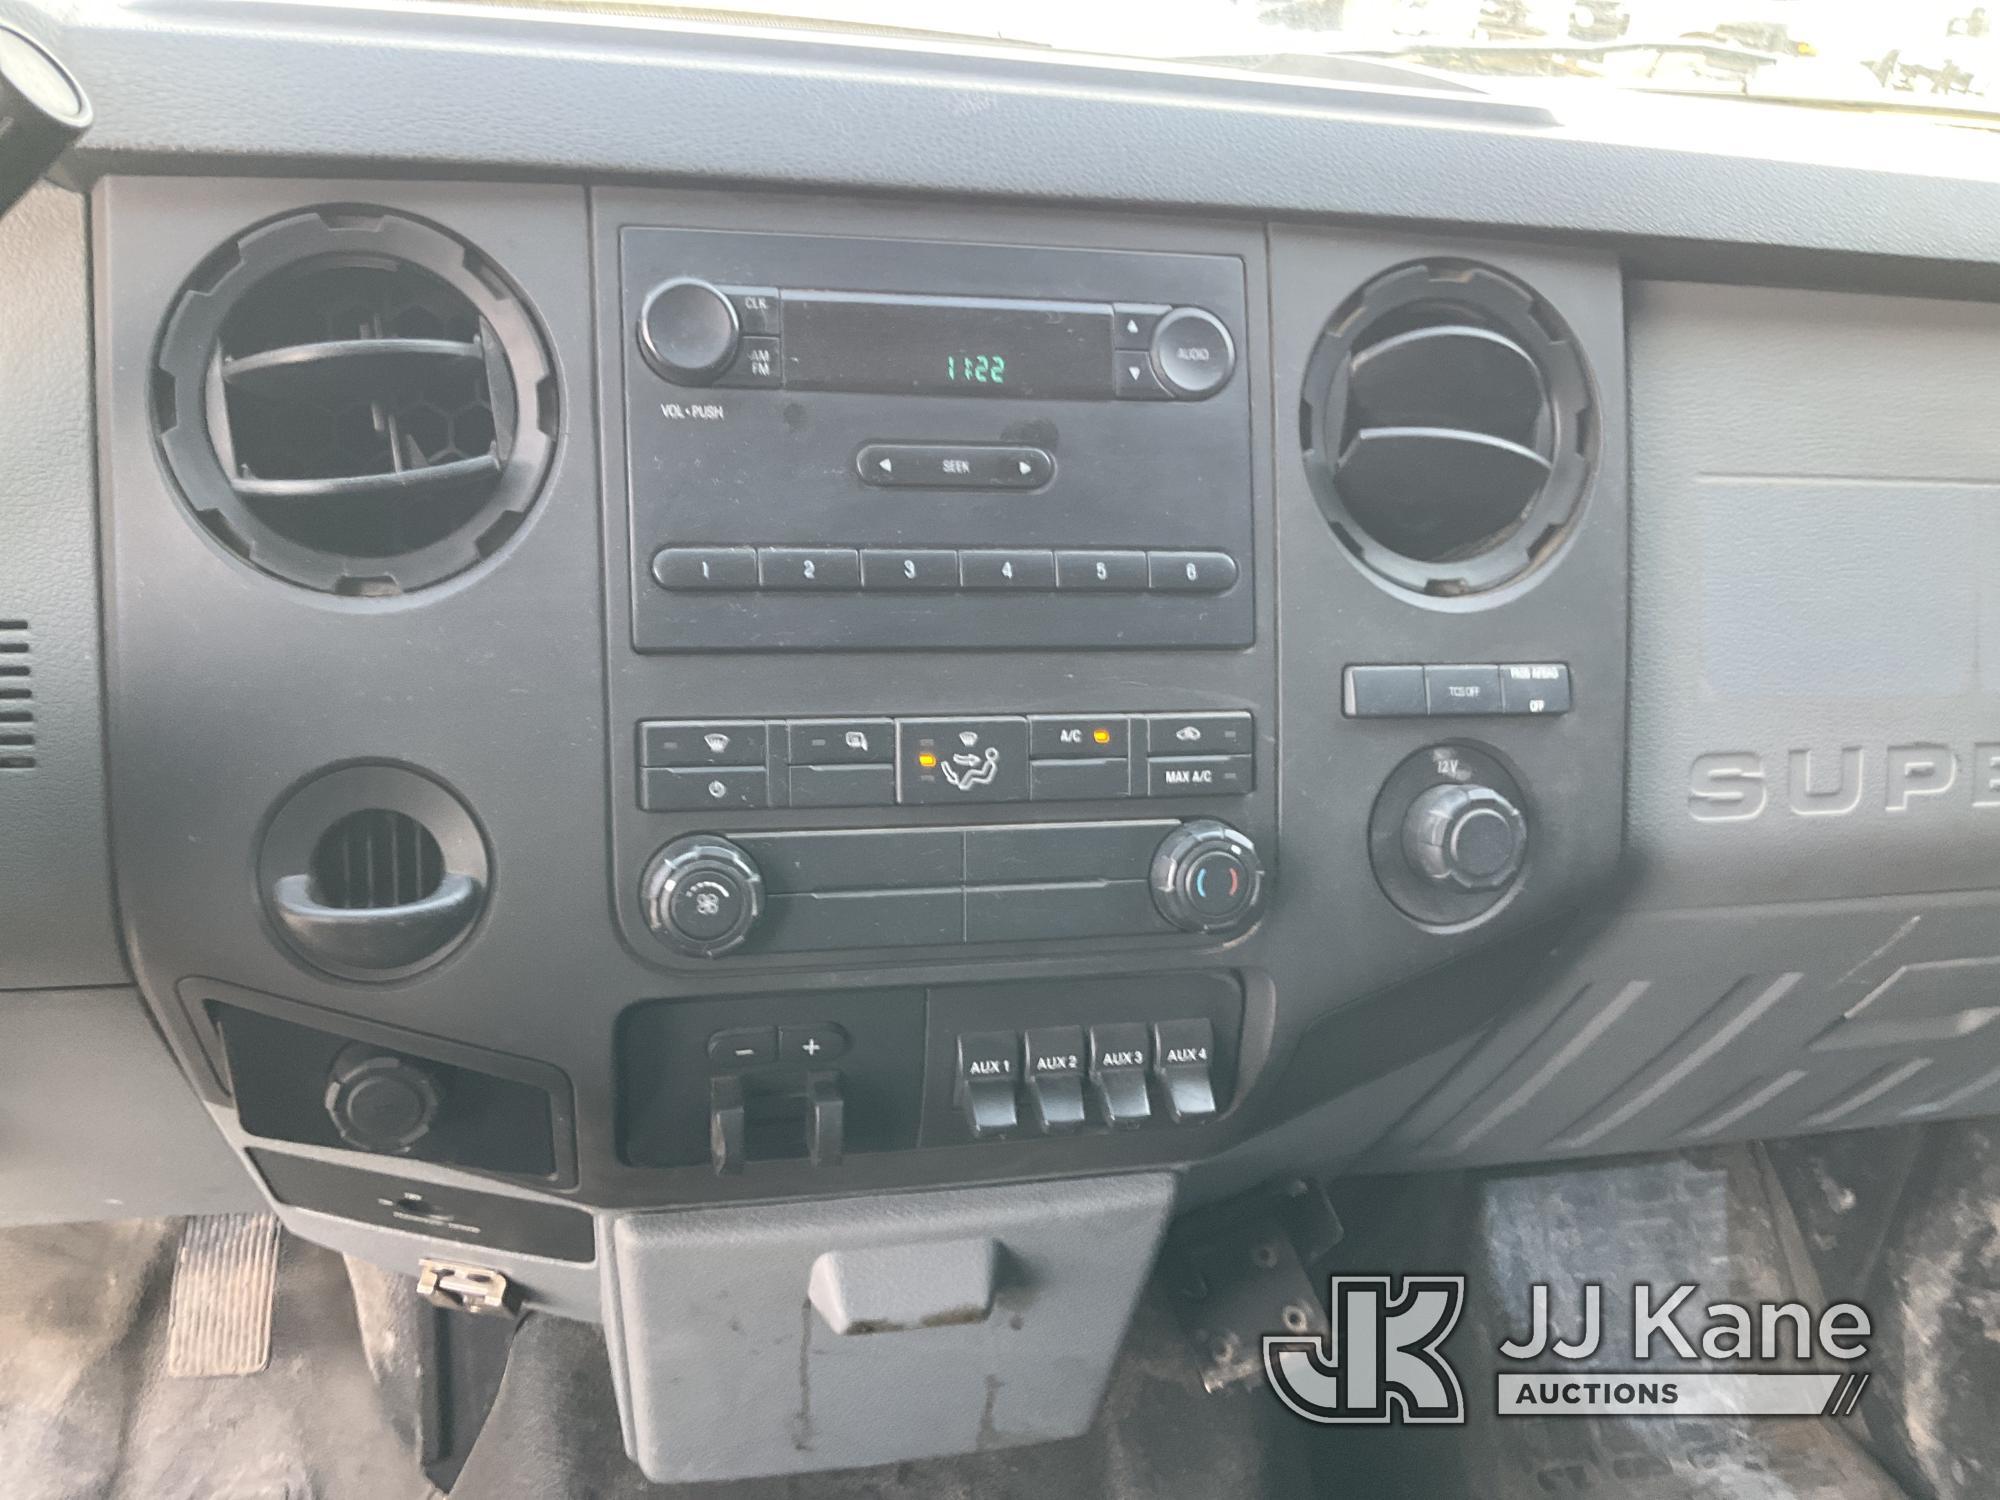 (Waxahachie, TX) 2016 Ford F550 URD/Flatbed Truck Runs & Moves) (Check Engine Light On, Exhaust Limi